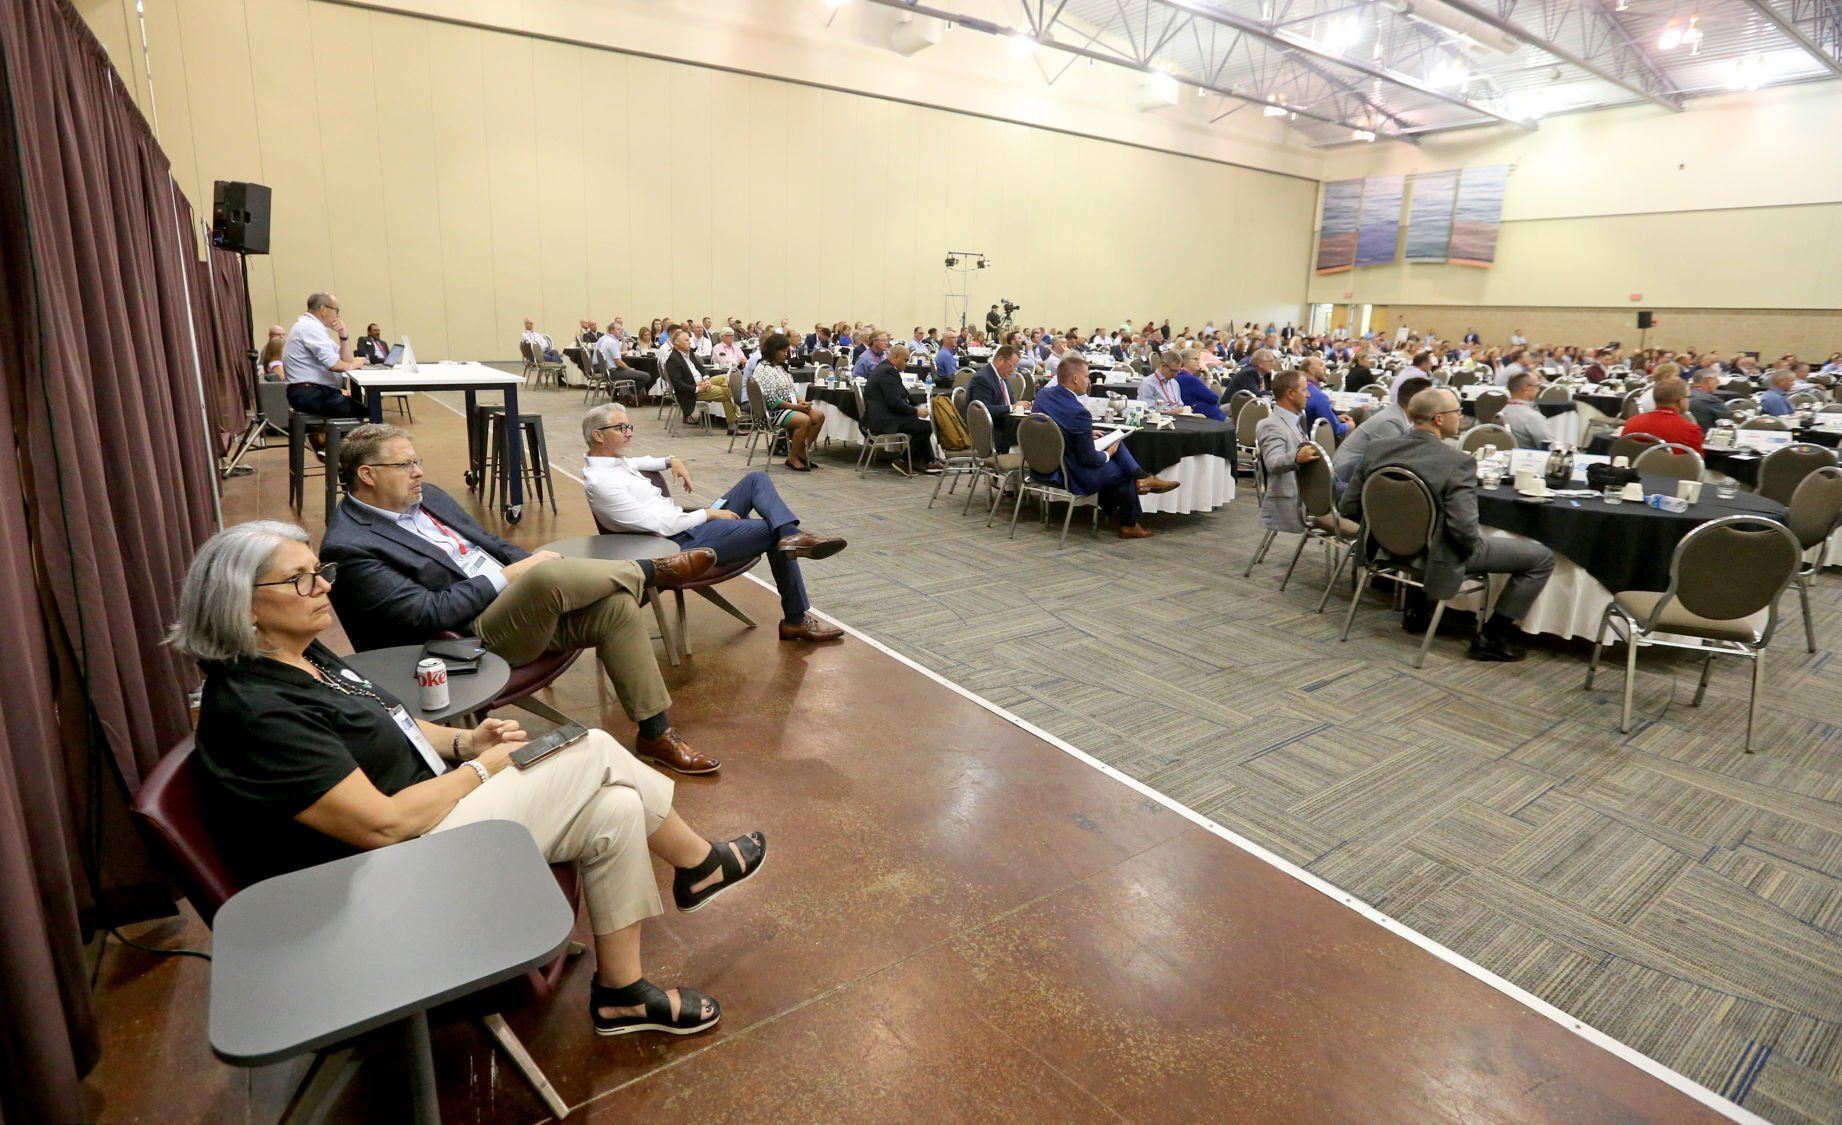 Attendees listen to a presentation from Sheryl Connelly, chief futurist with Ford Motor Co., during the Iowa Association of Business and Industry conference at Grand River Center in Dubuque on Wednesday, June 15, 2022.    PHOTO CREDIT: JESSICA REILLY